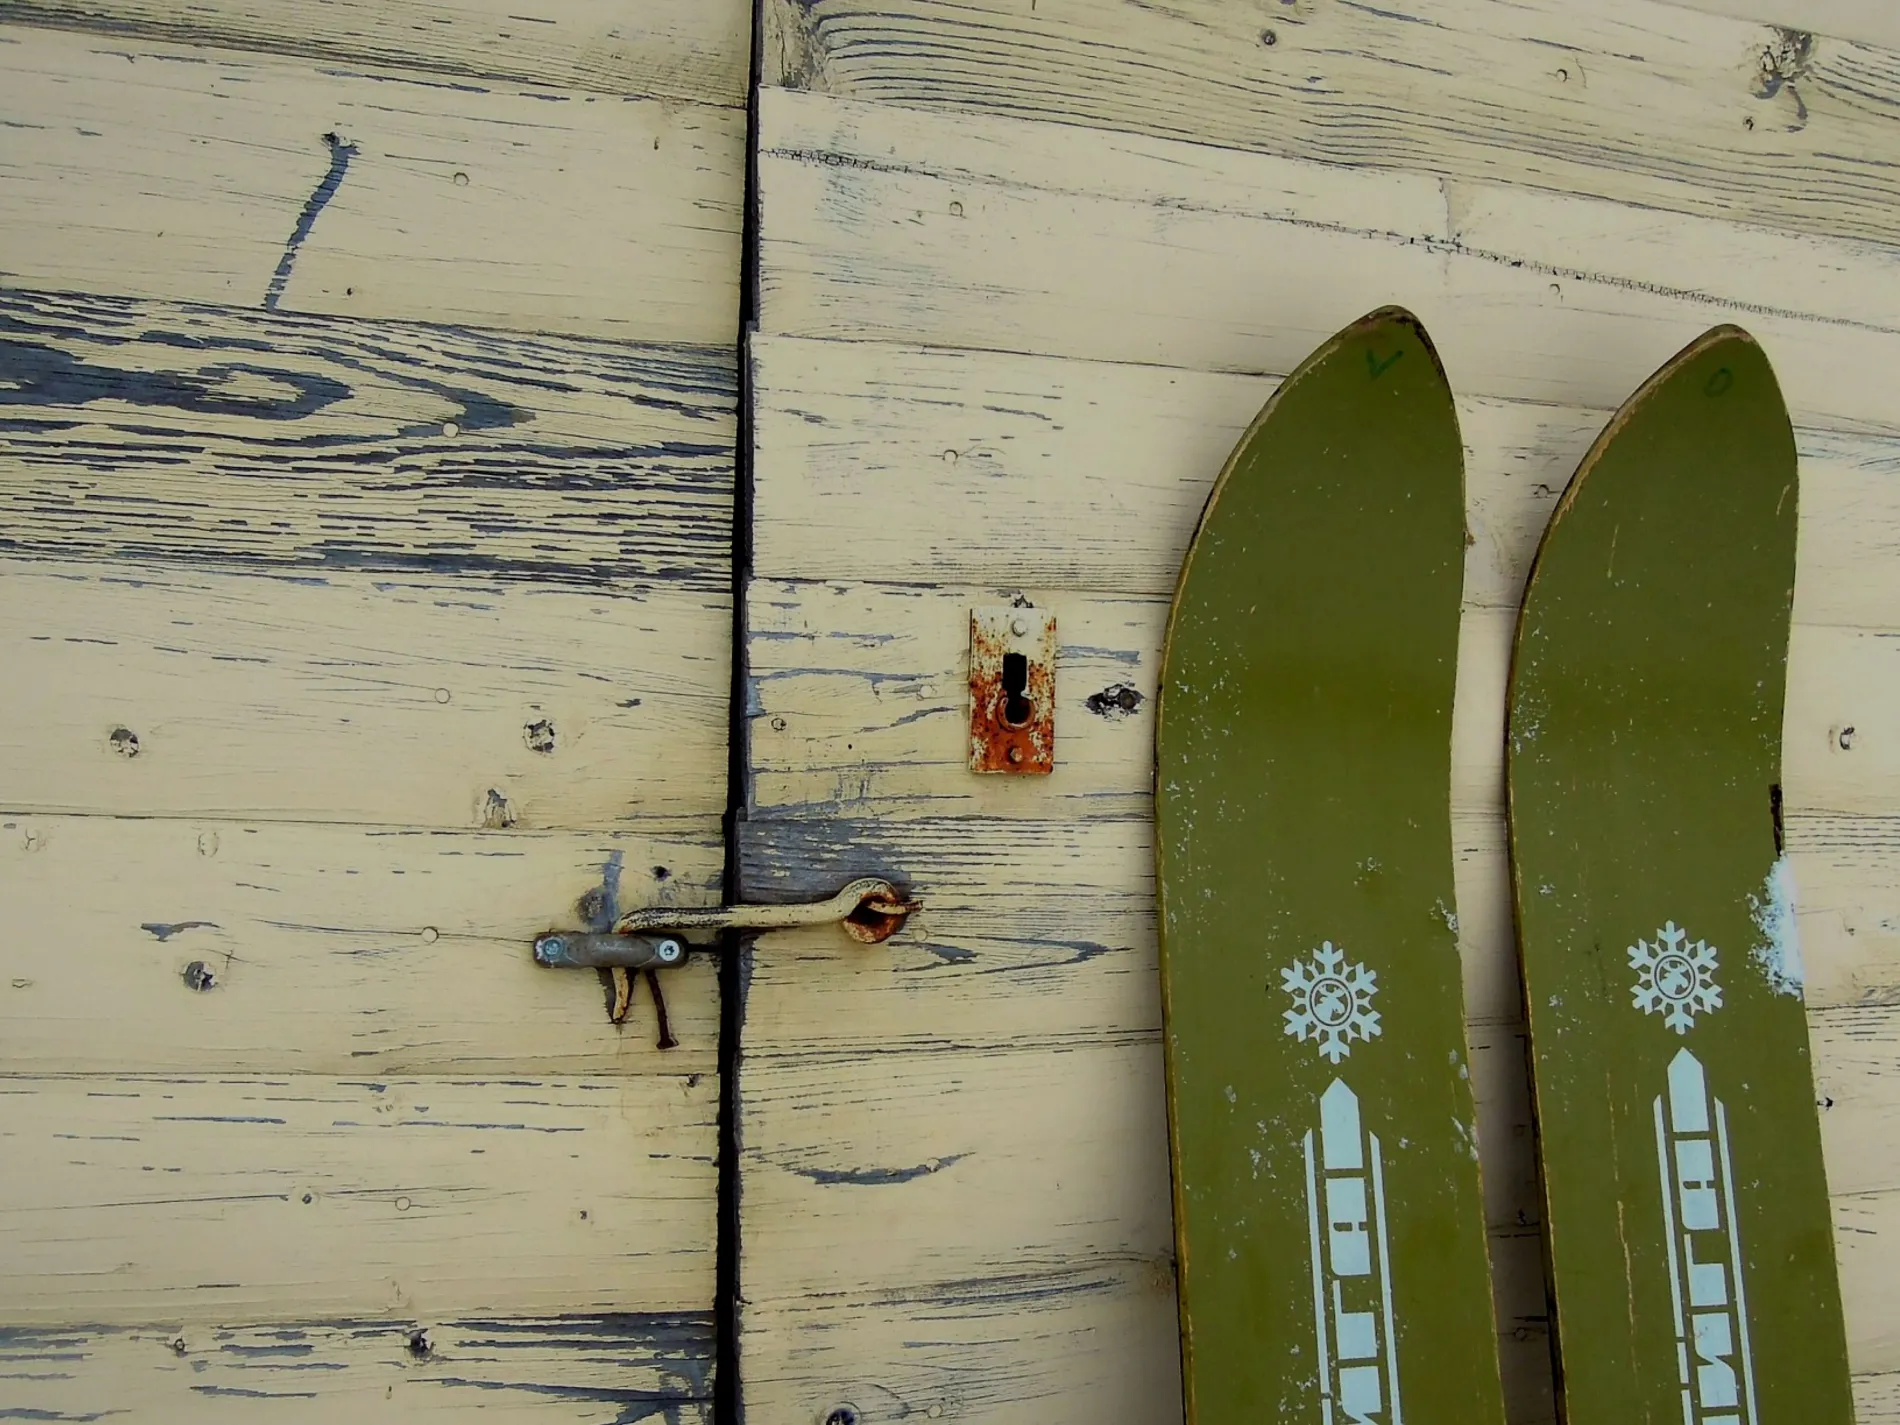 Old skis leaning on the wood wall